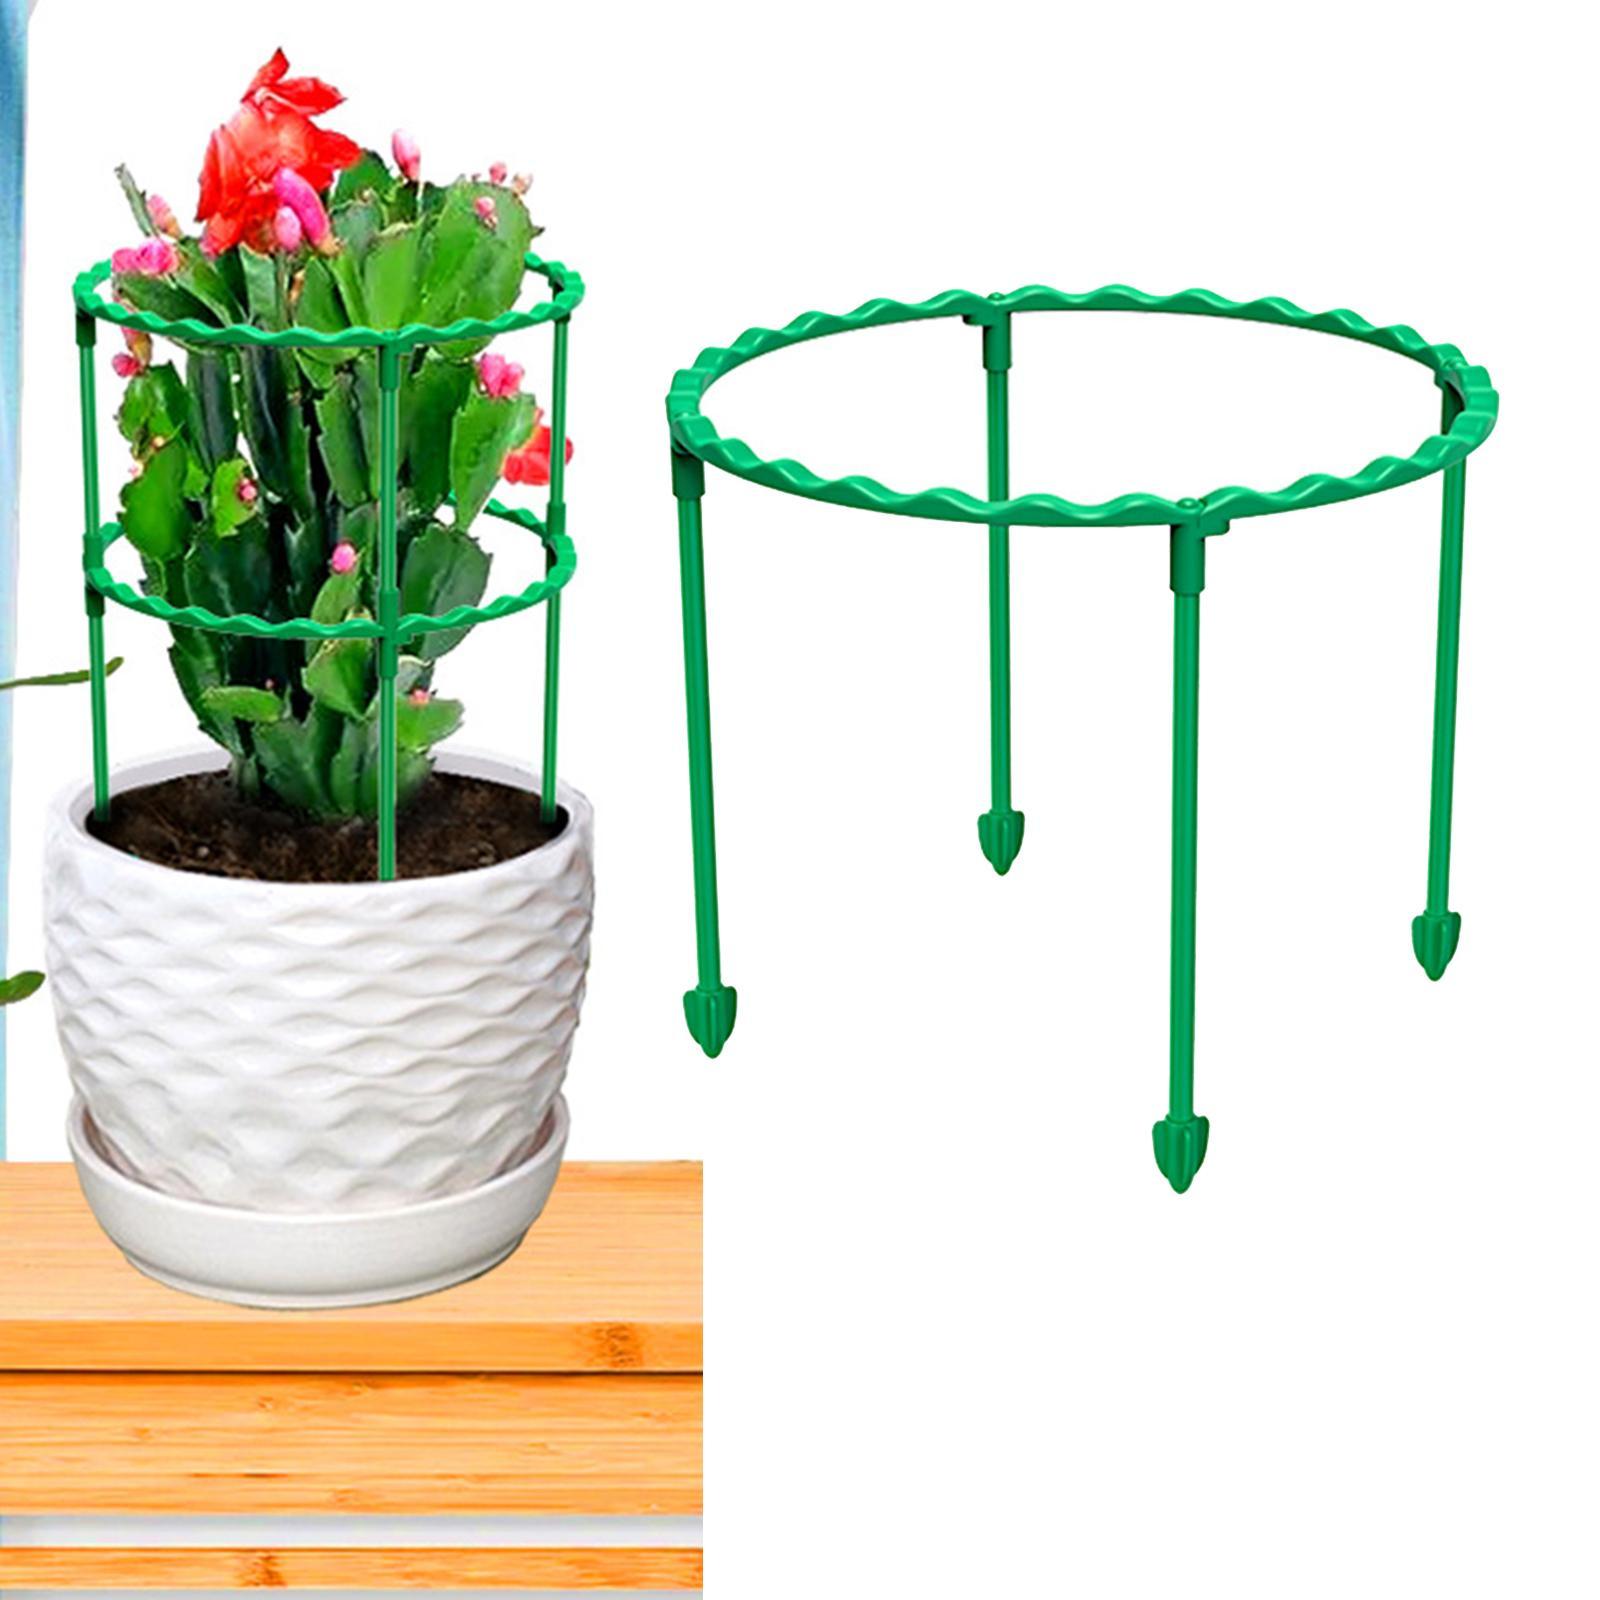 Tomato Growing Cage Garden Plant Support Stakes for Potted Plants Vines Pots